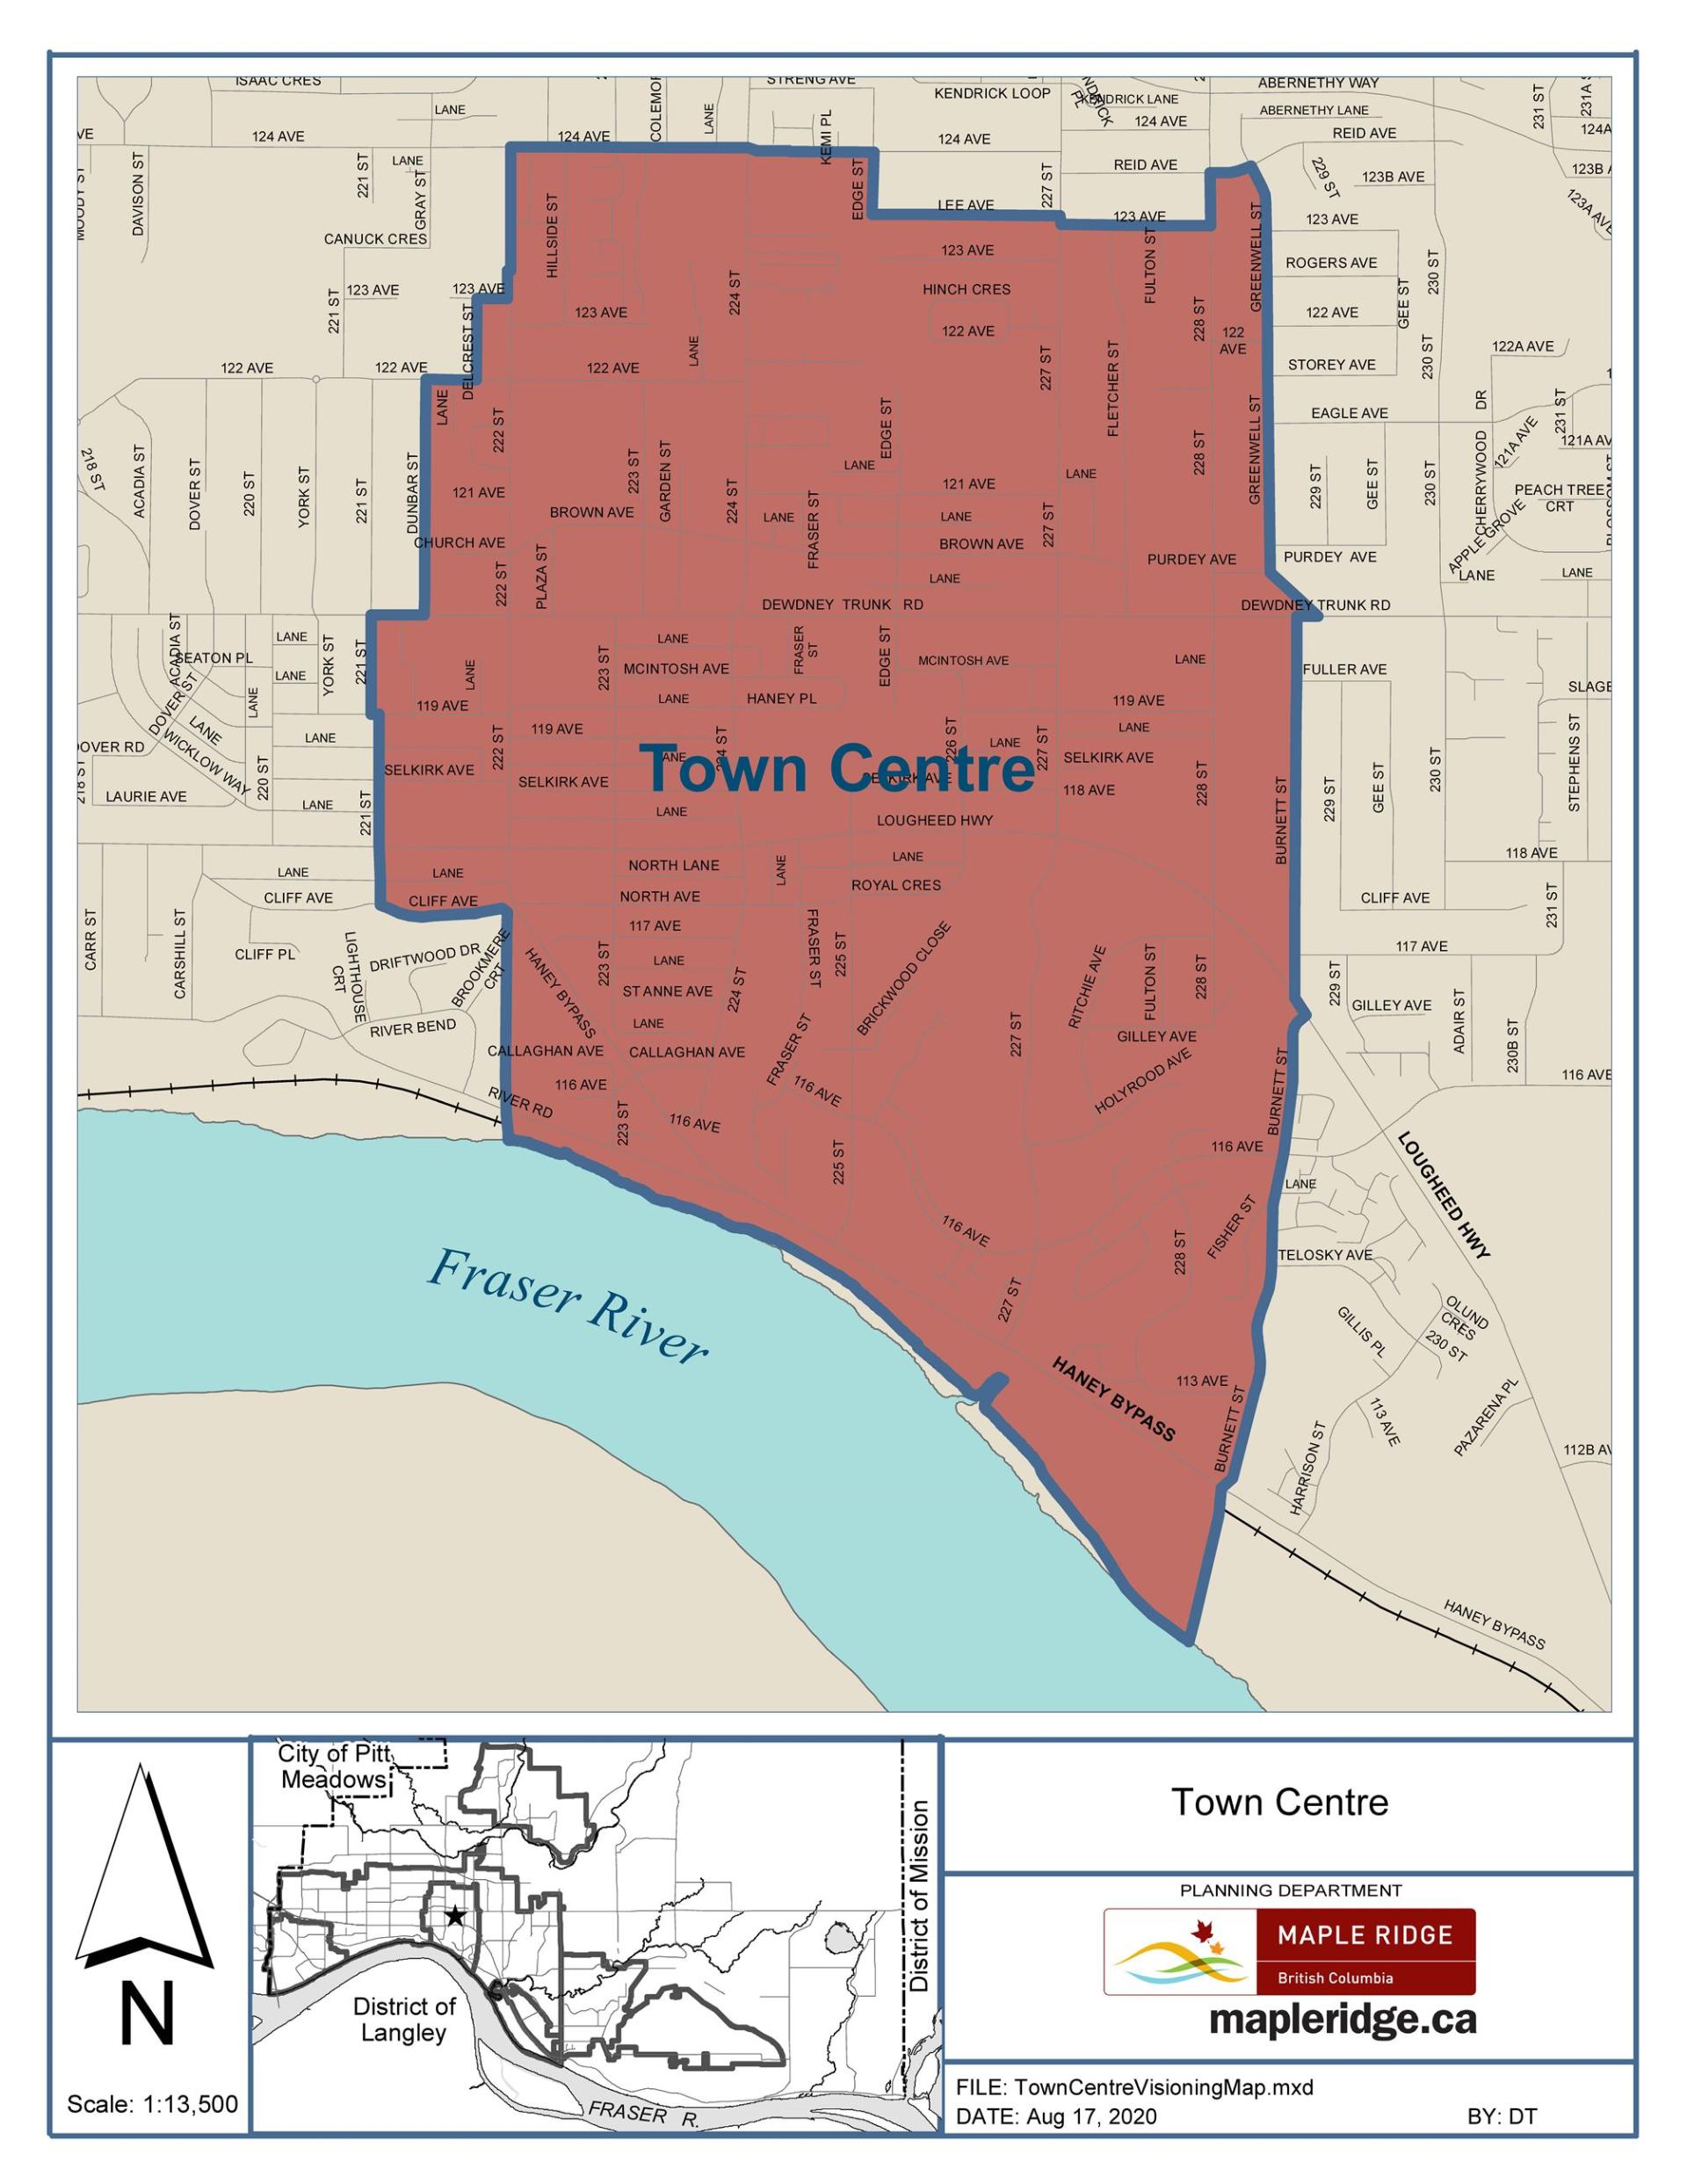 Map of Maple Ridge with the Town Centre Area highlighted in red.